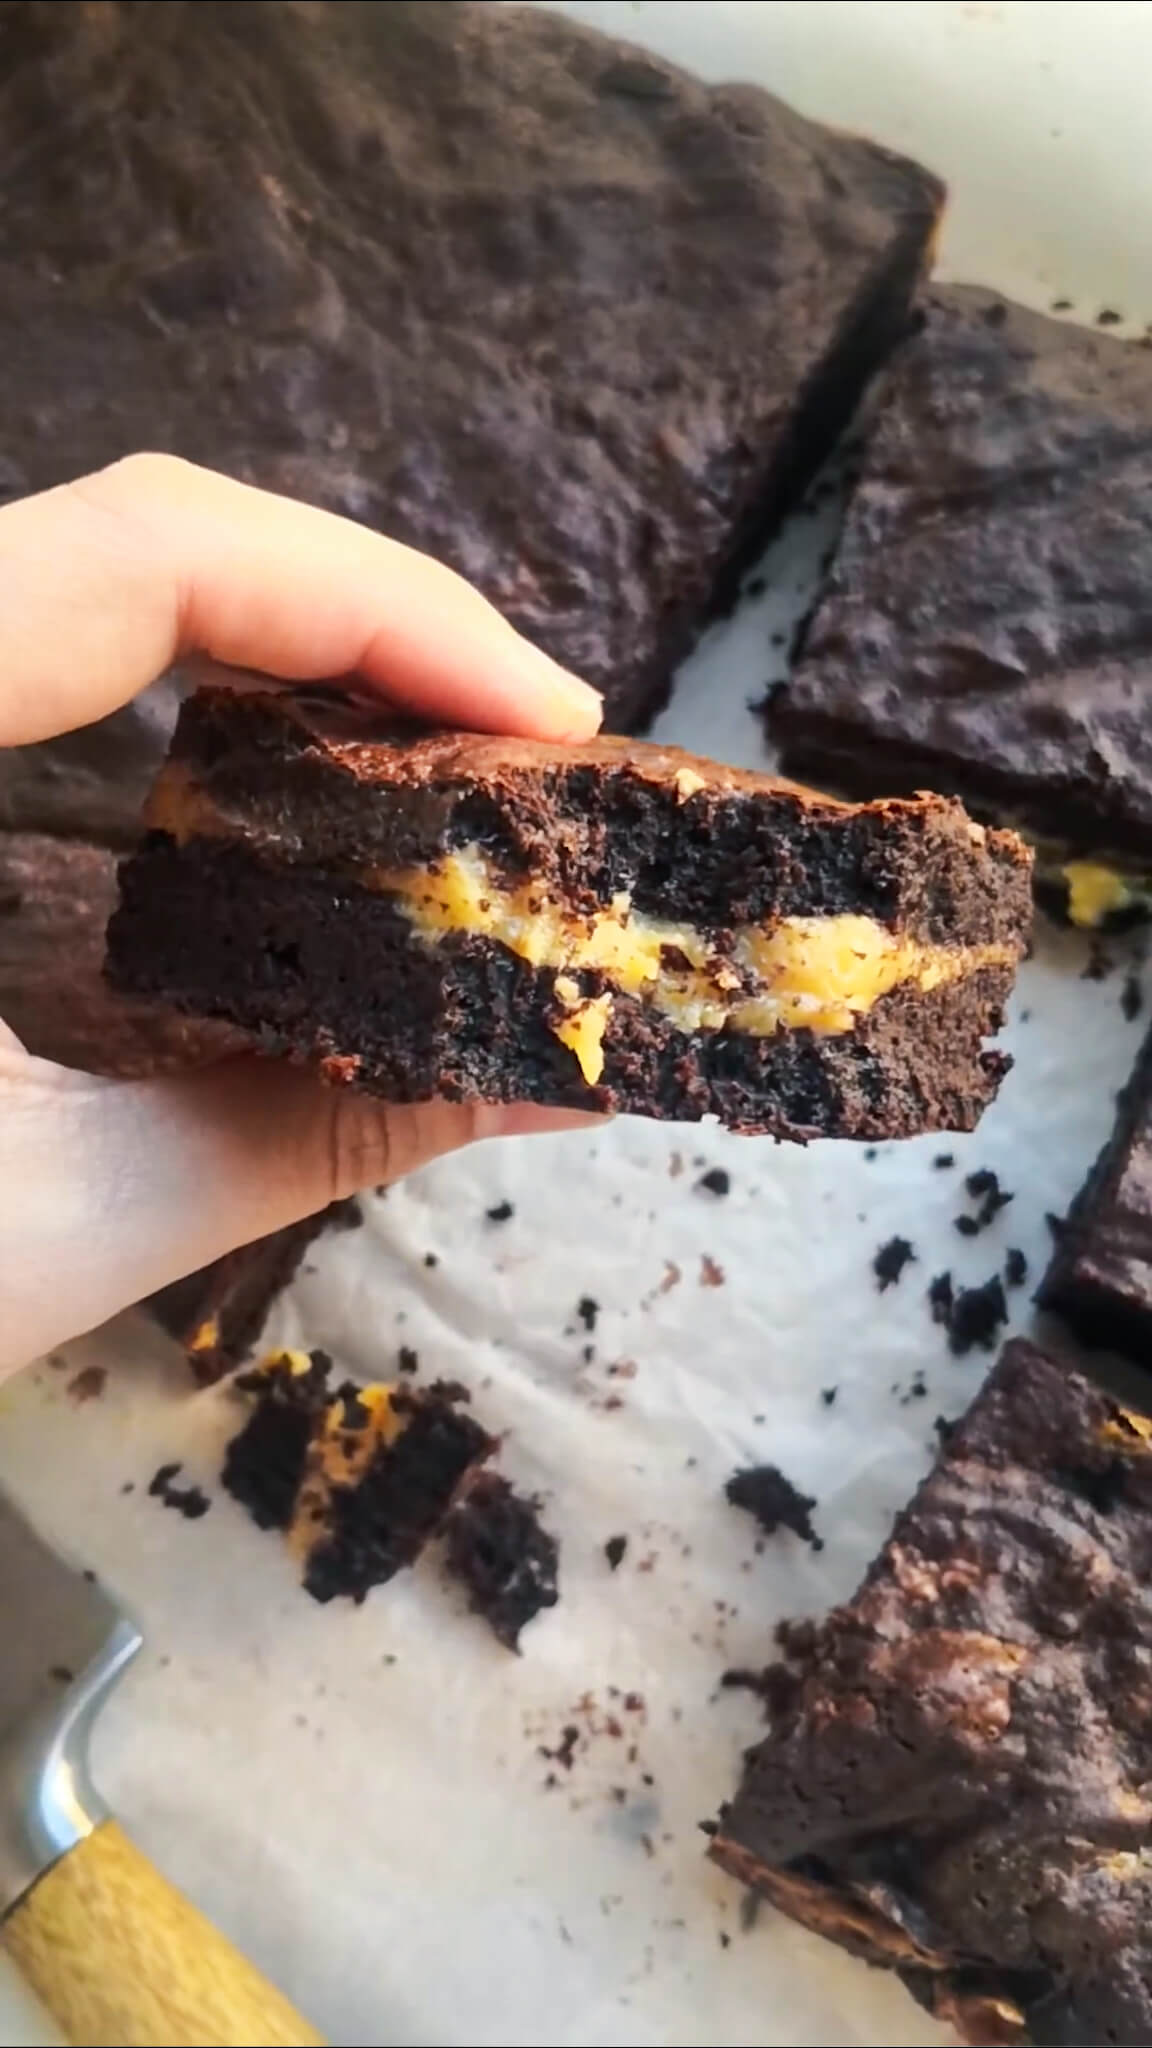 Hand holding up a salted caramel brownie with more brownies in the background.